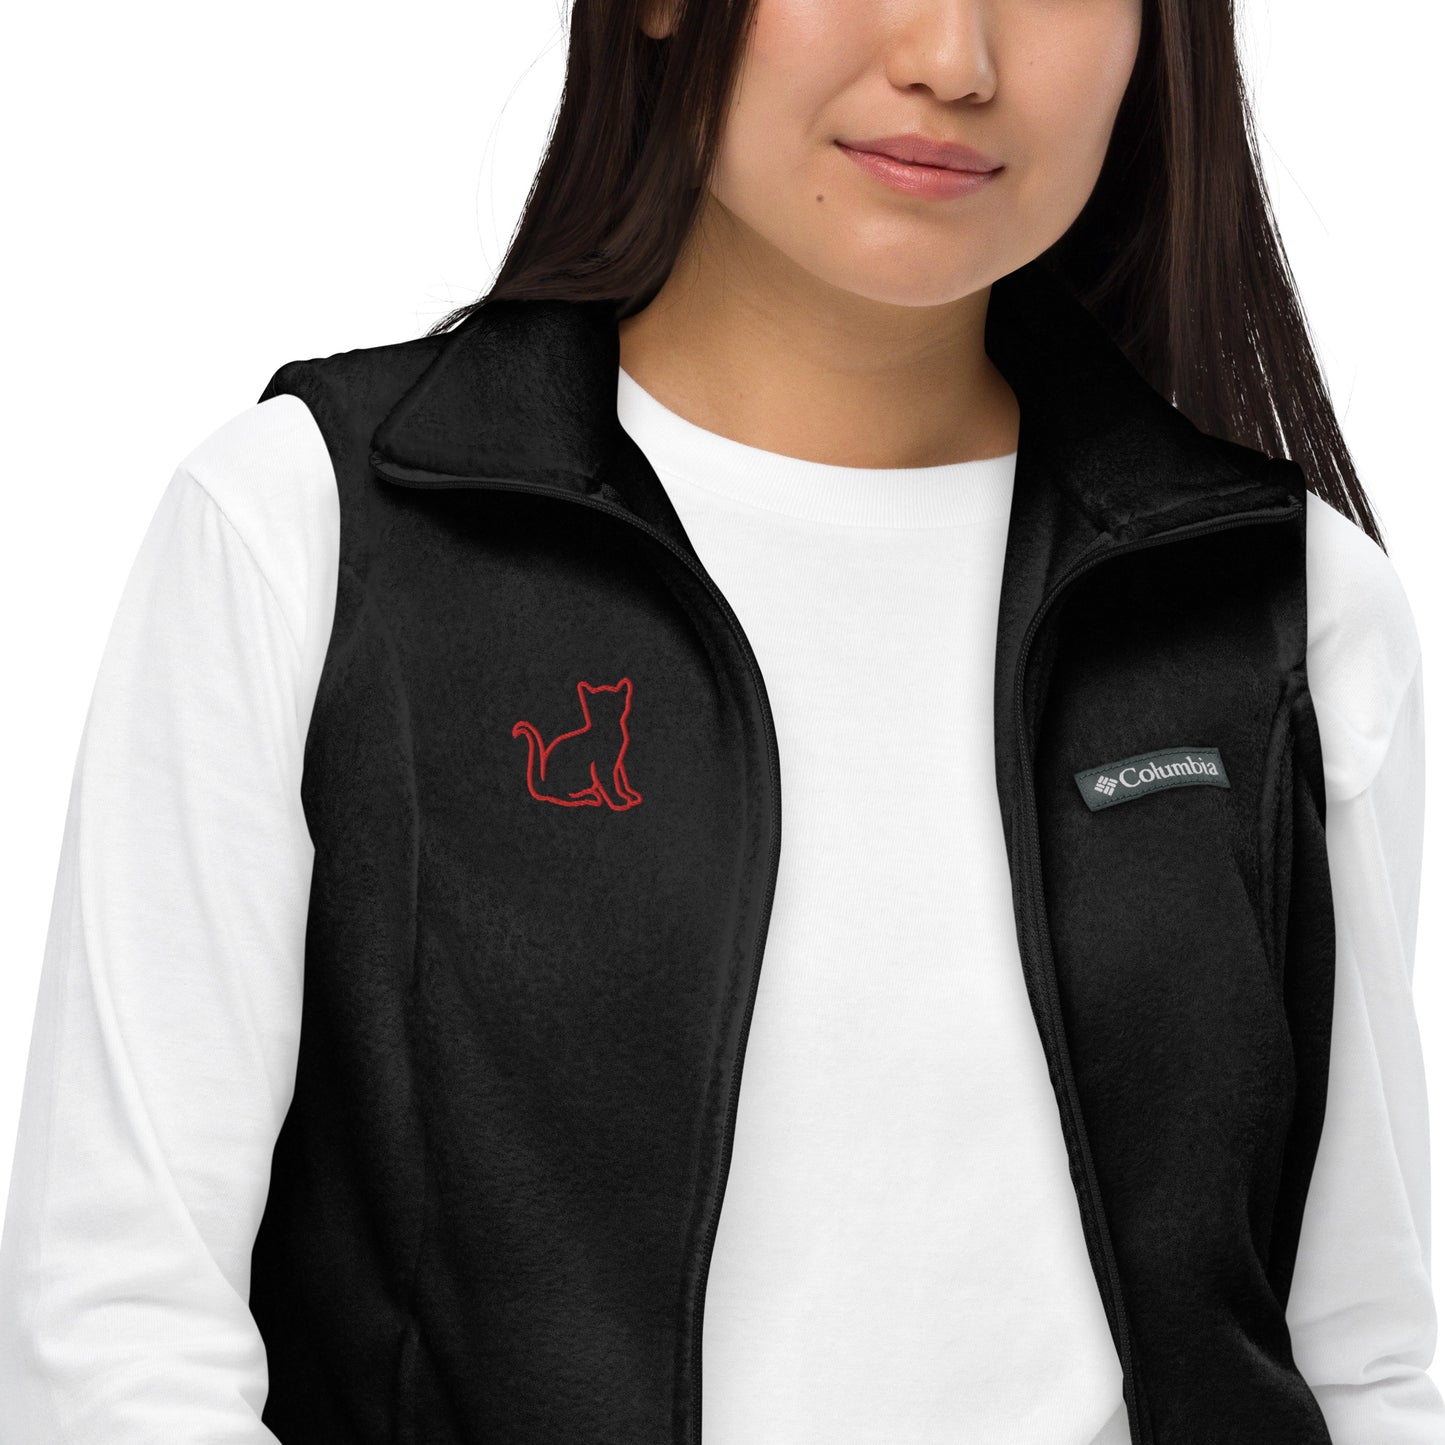 Women’s Columbia fleece vest red cat embroidery on right chest